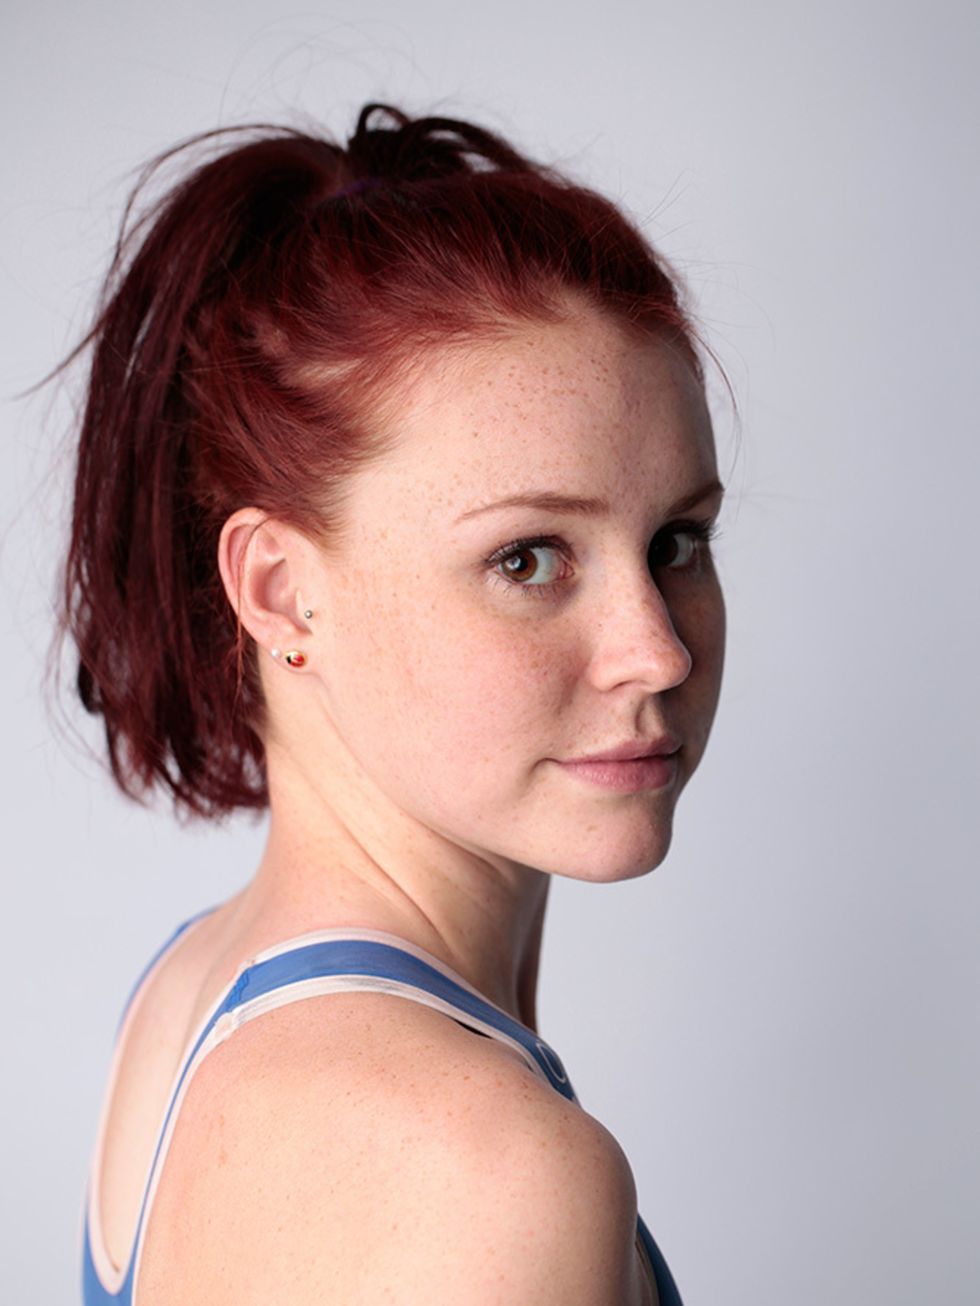 <p>Lucy Hall, 23, <span style="line-height:1.6">2012 Team GB Olympic Triathlete</span></p>

<p>English elite athlete Lucy represented Team GB at the London 2012 Olympic Games, aged just 20. She was the first competitor to exit the Serpentine, making her t